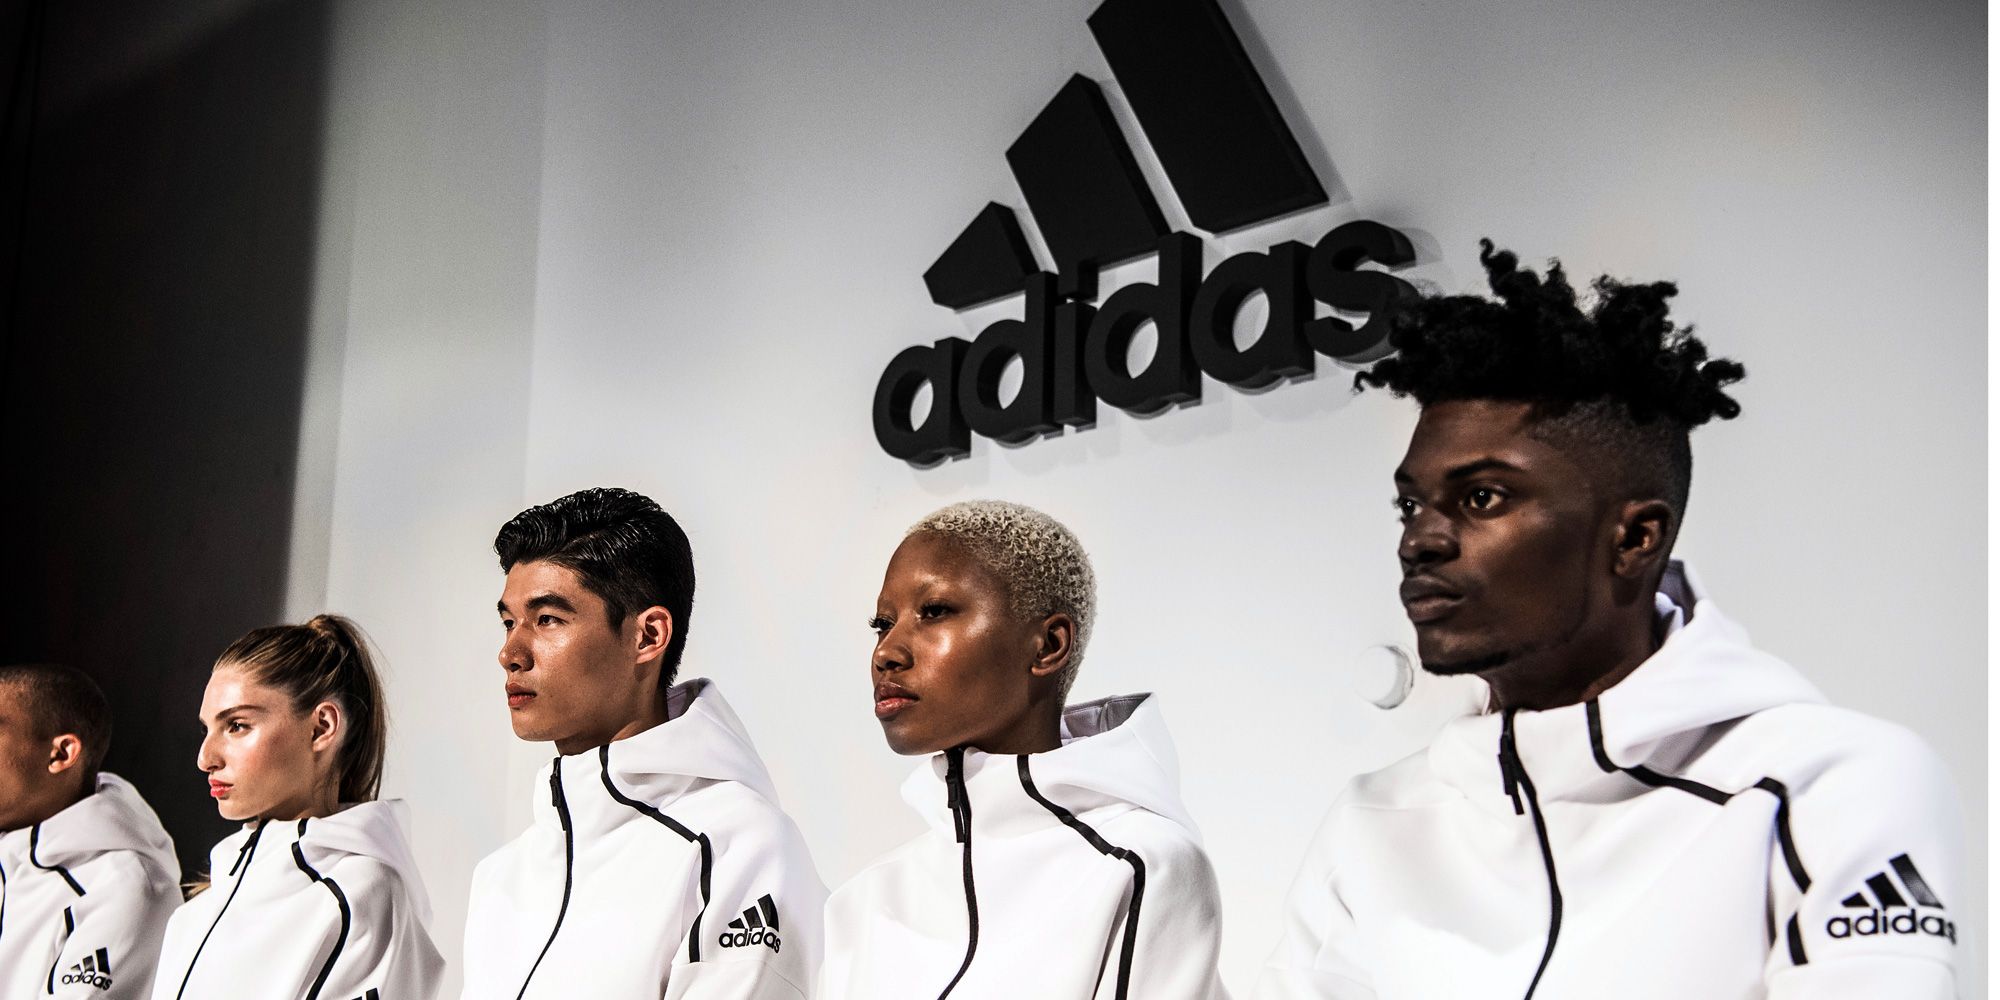 Adidas' Clothing Blends and Performance